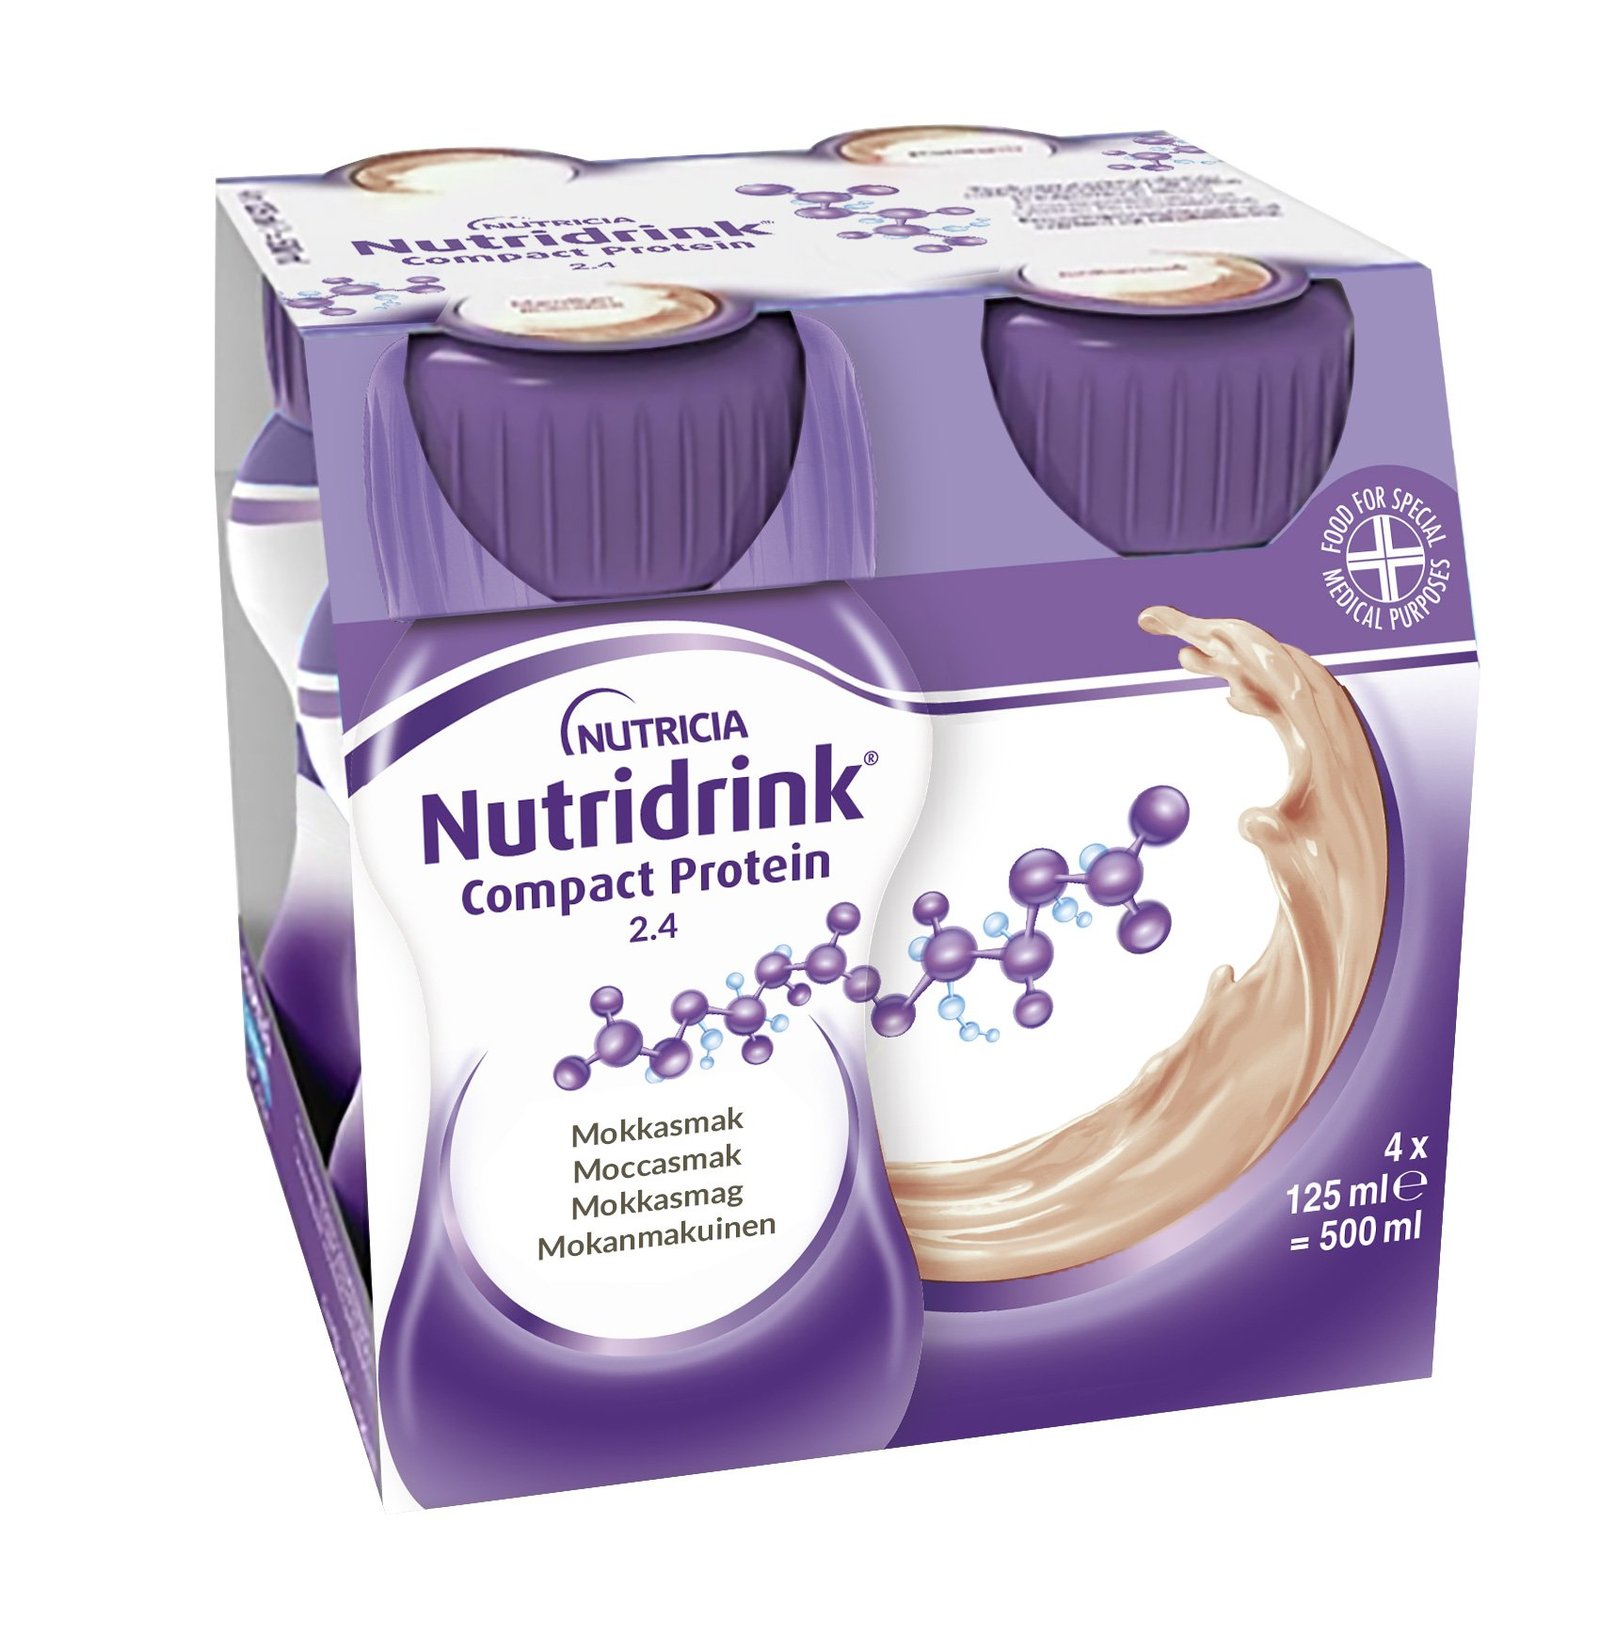 Nutridrink Compact Protein Moccasmak 4 x 125 ml